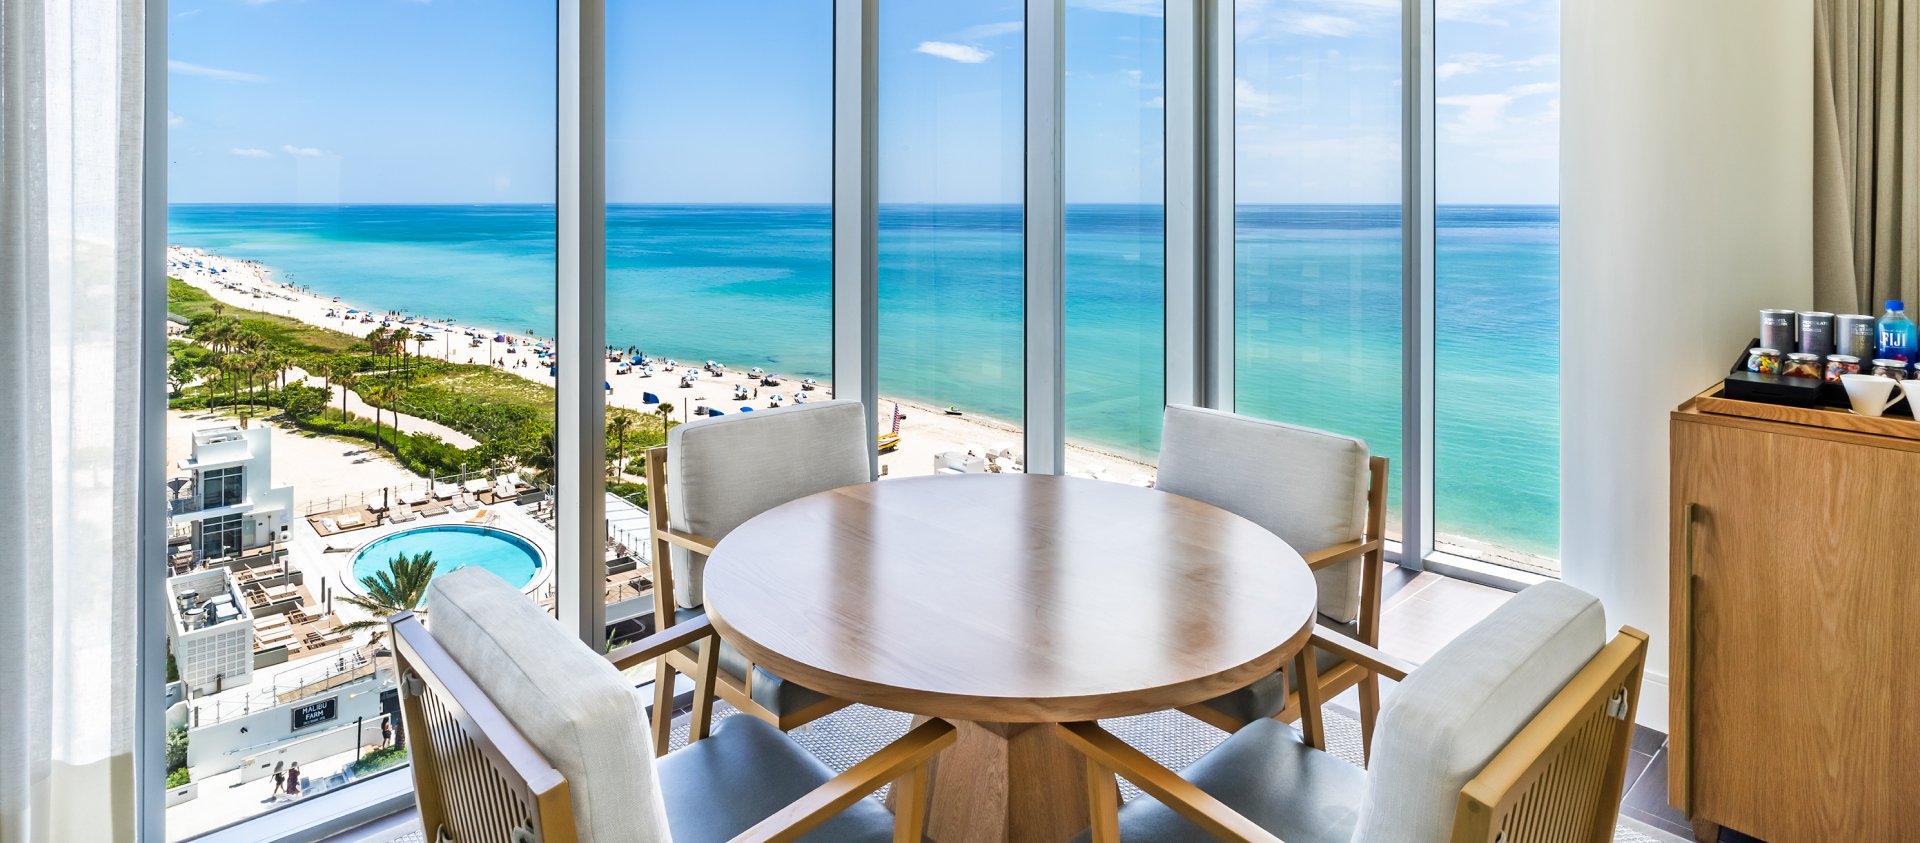 A view of the beach from a room at Eden Roc